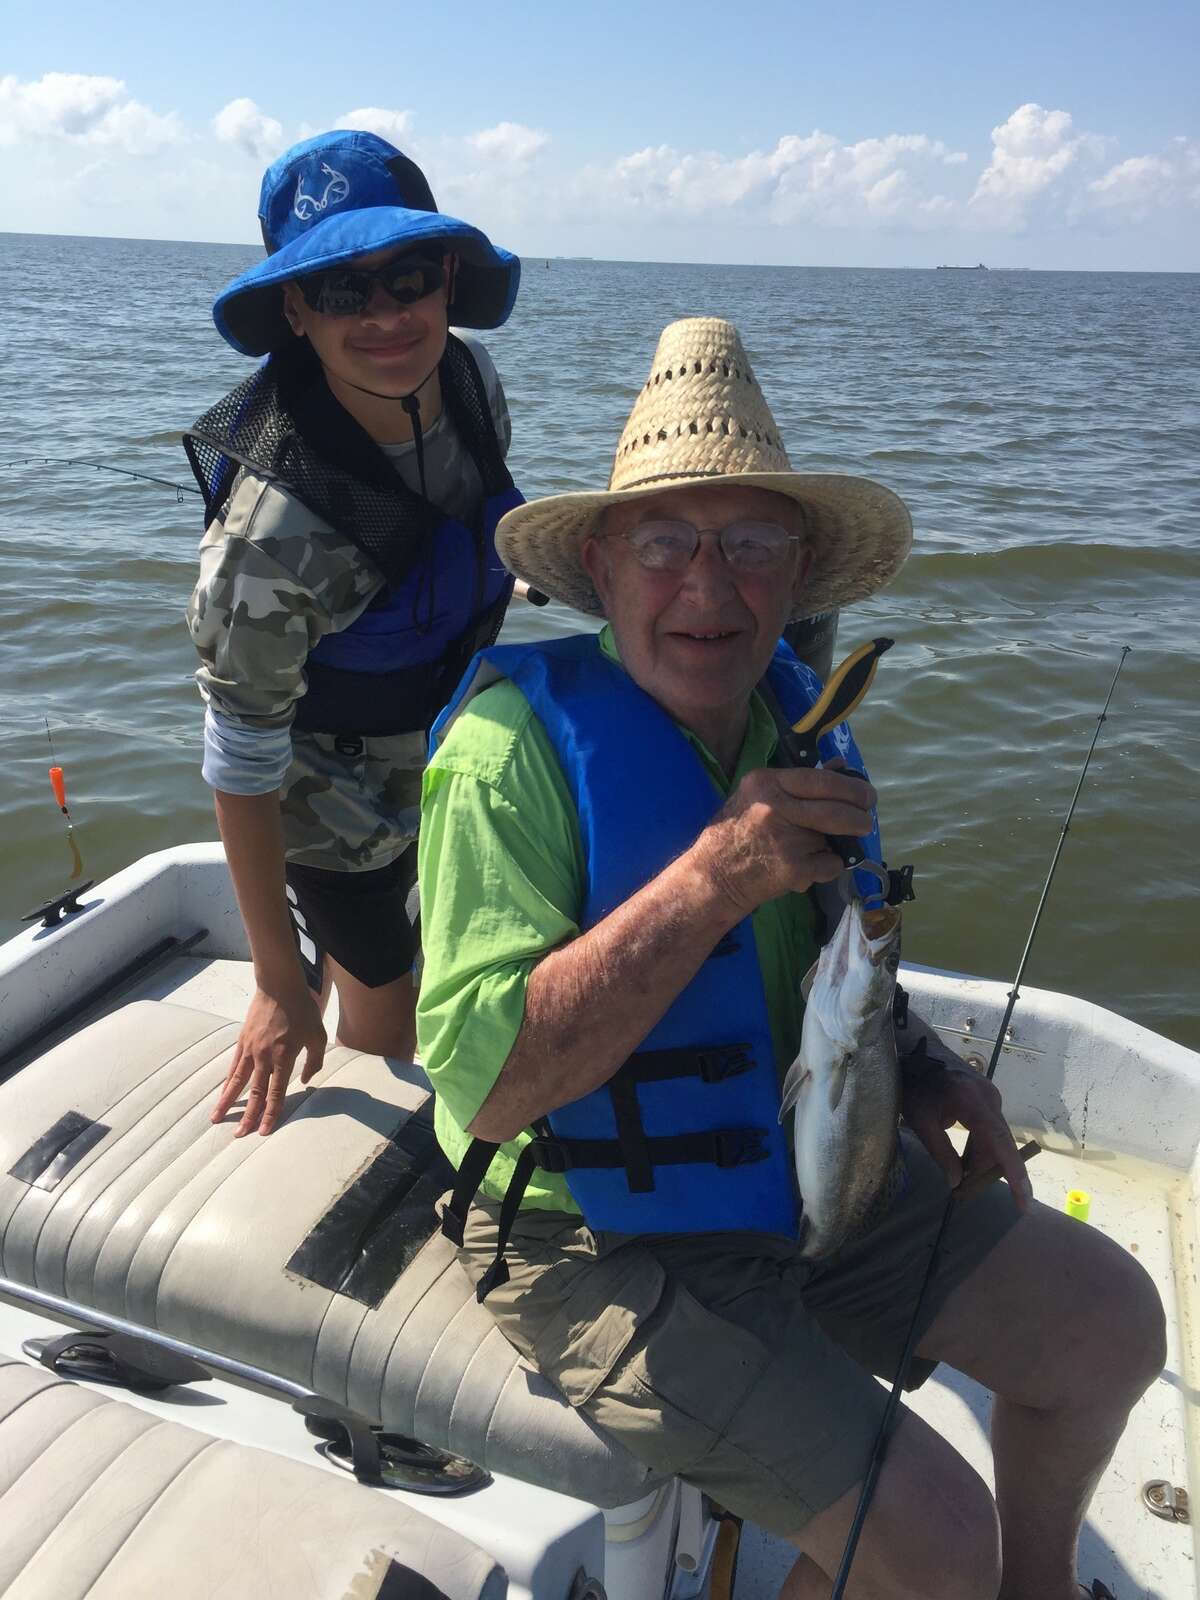 Jerry Sebek, a 78-year-old man from San Marcos, died last month after he contracted a flesh-eating disease while fishing near Palacios, family members said.